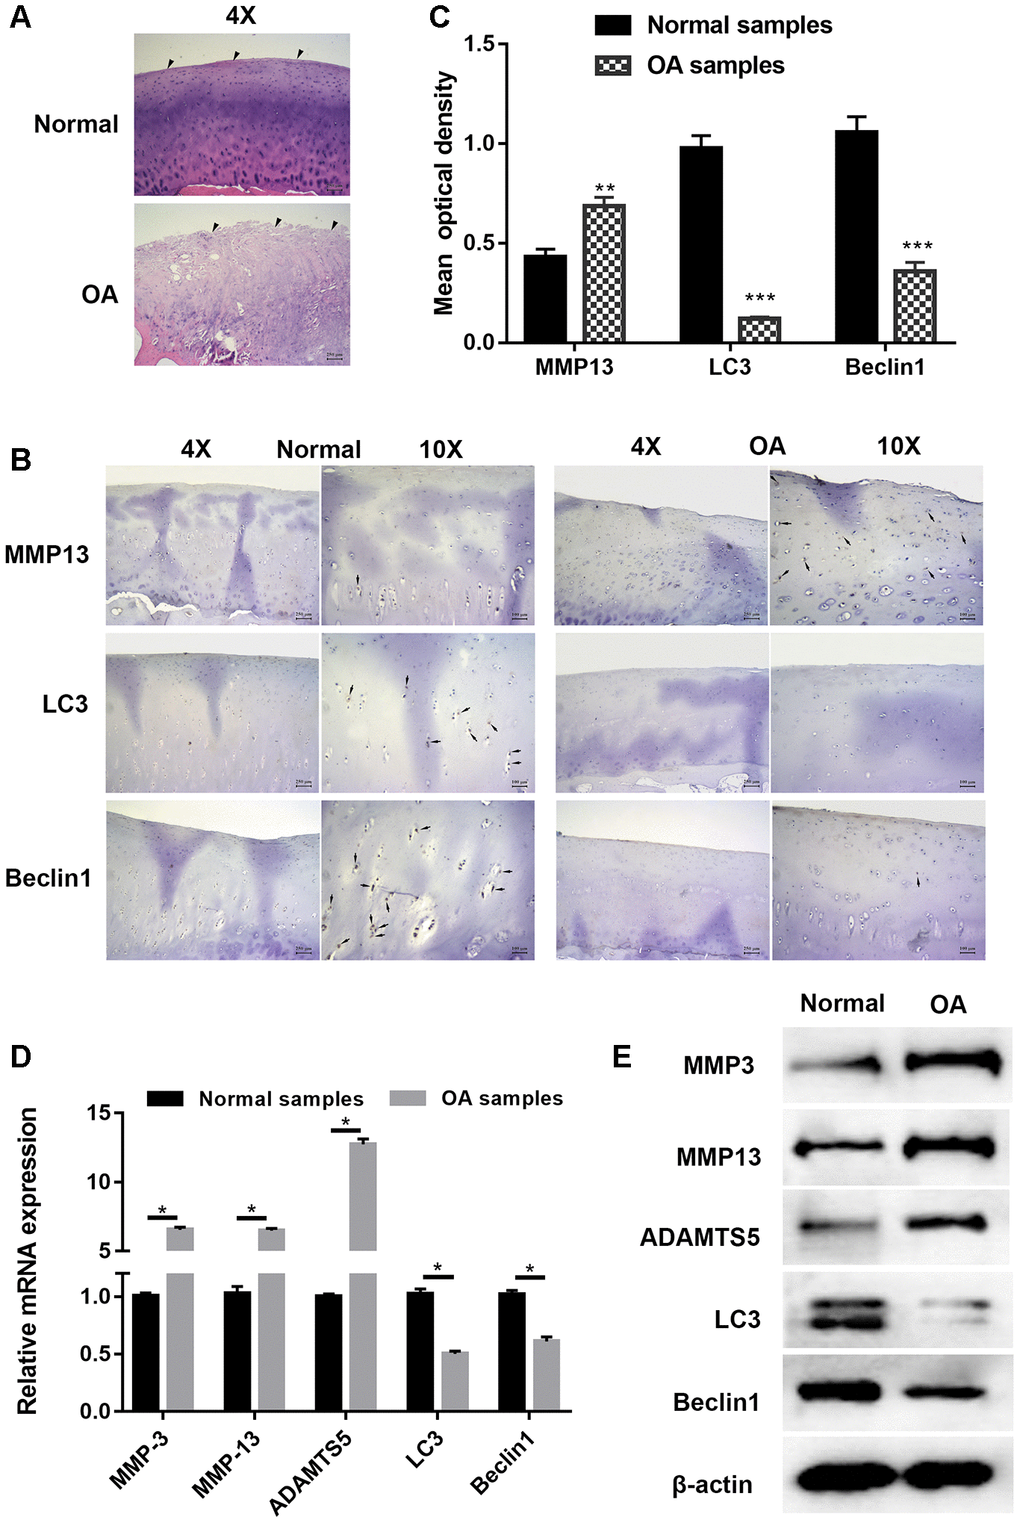 Cartilage degradation and defection of autophagy were validated in osteoarthritis samples. (A) Representative images hematoxylin and eosin (HE) staining; (B) Representative images of immunohistochemistry; (C) Quantitative optical density analysis of immunohistochemistry for samples; (D) mRNA and (E) protein expression of cartilage related proteins (MMP3, MMP13, and ADAMTS5) and autophagy related proteins Beclin1 and LC3. Data represent the mean ± SD (n=6), ** p p 